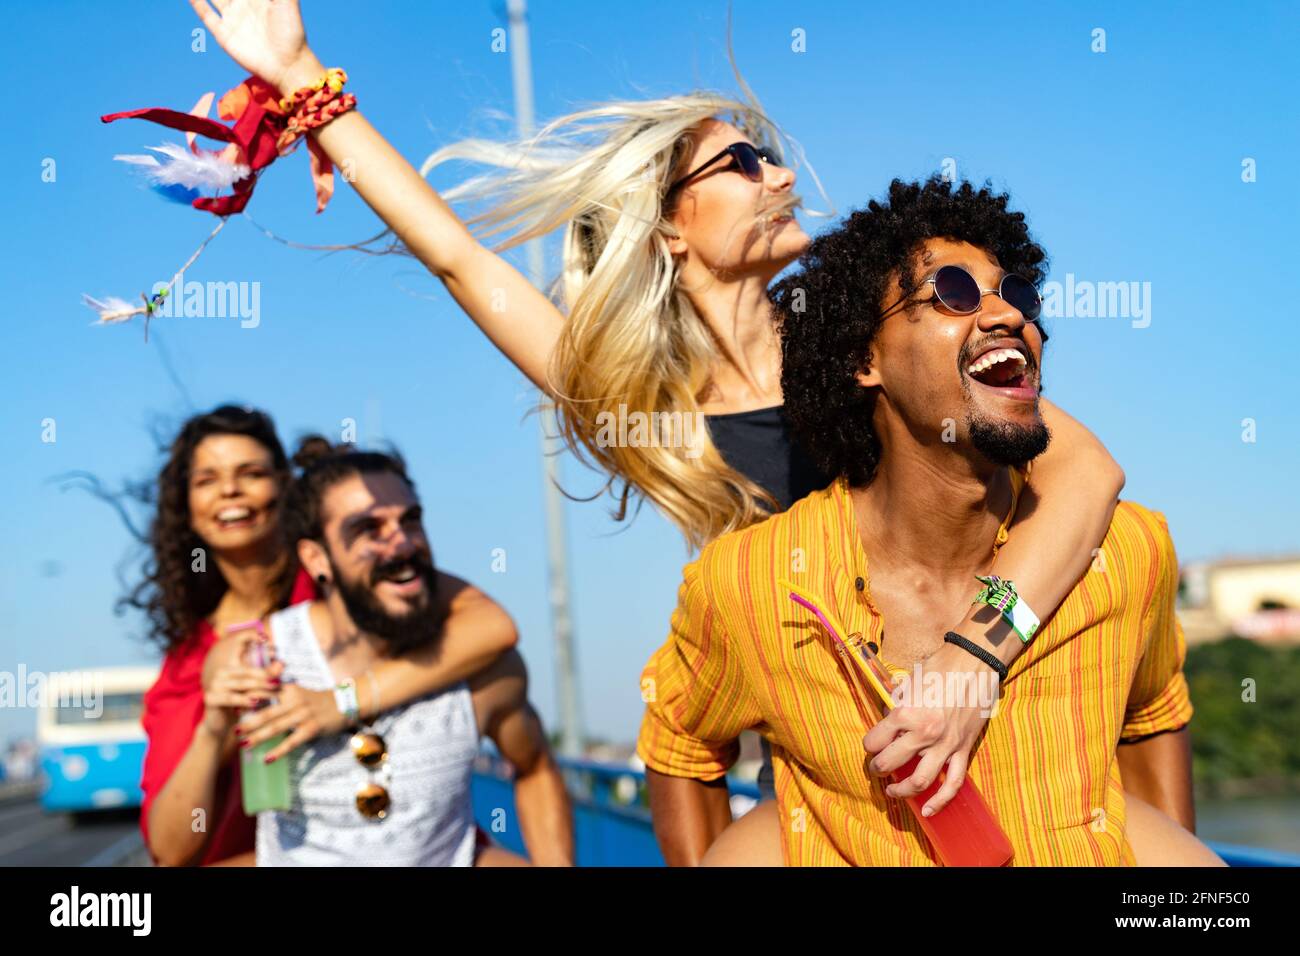 Group of young happy friends enjoying outdoor music festival Stock Photo